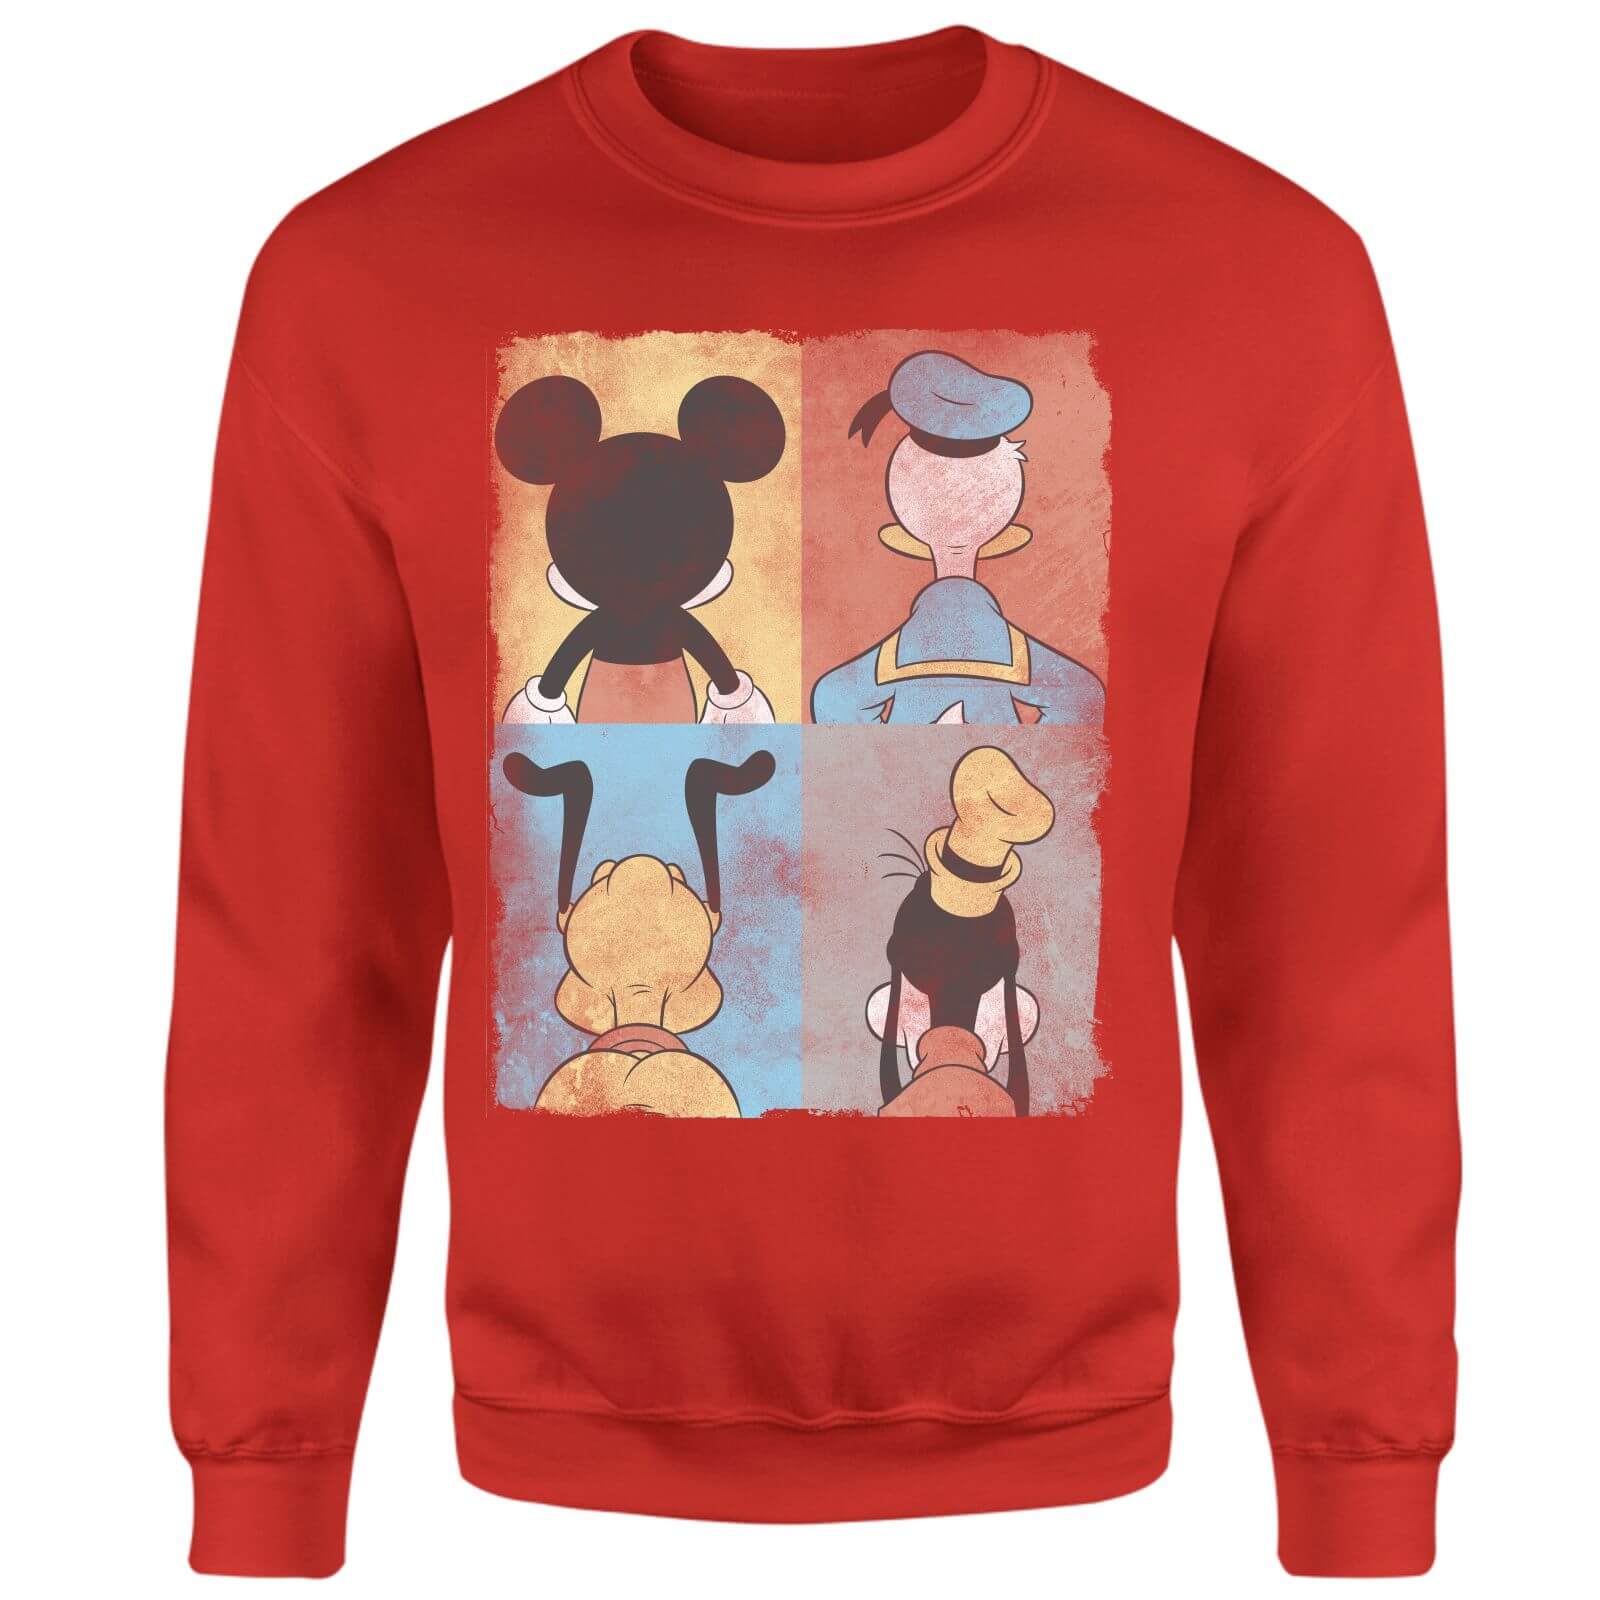 Donald Duck Mickey Mouse Pluto Goofy Tiles Sweatshirt - Red - XS - Red